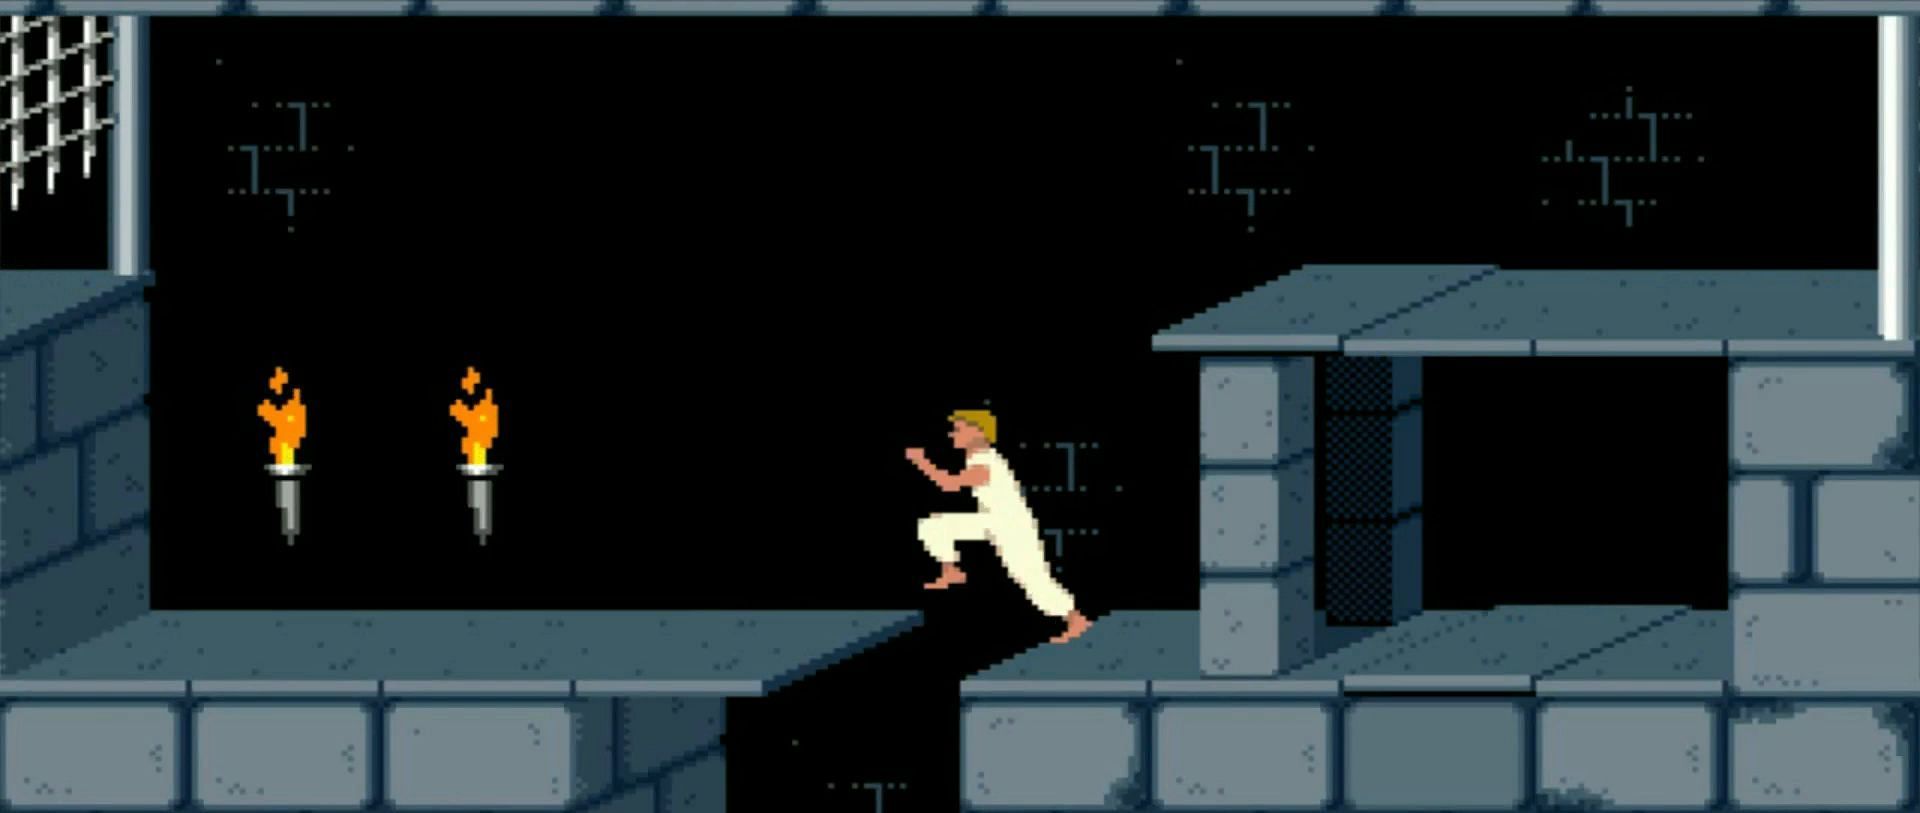 The Prince referred to Mechner&#039;s brother doing acrobatic stunts (Image via Prince of Persia 1989)